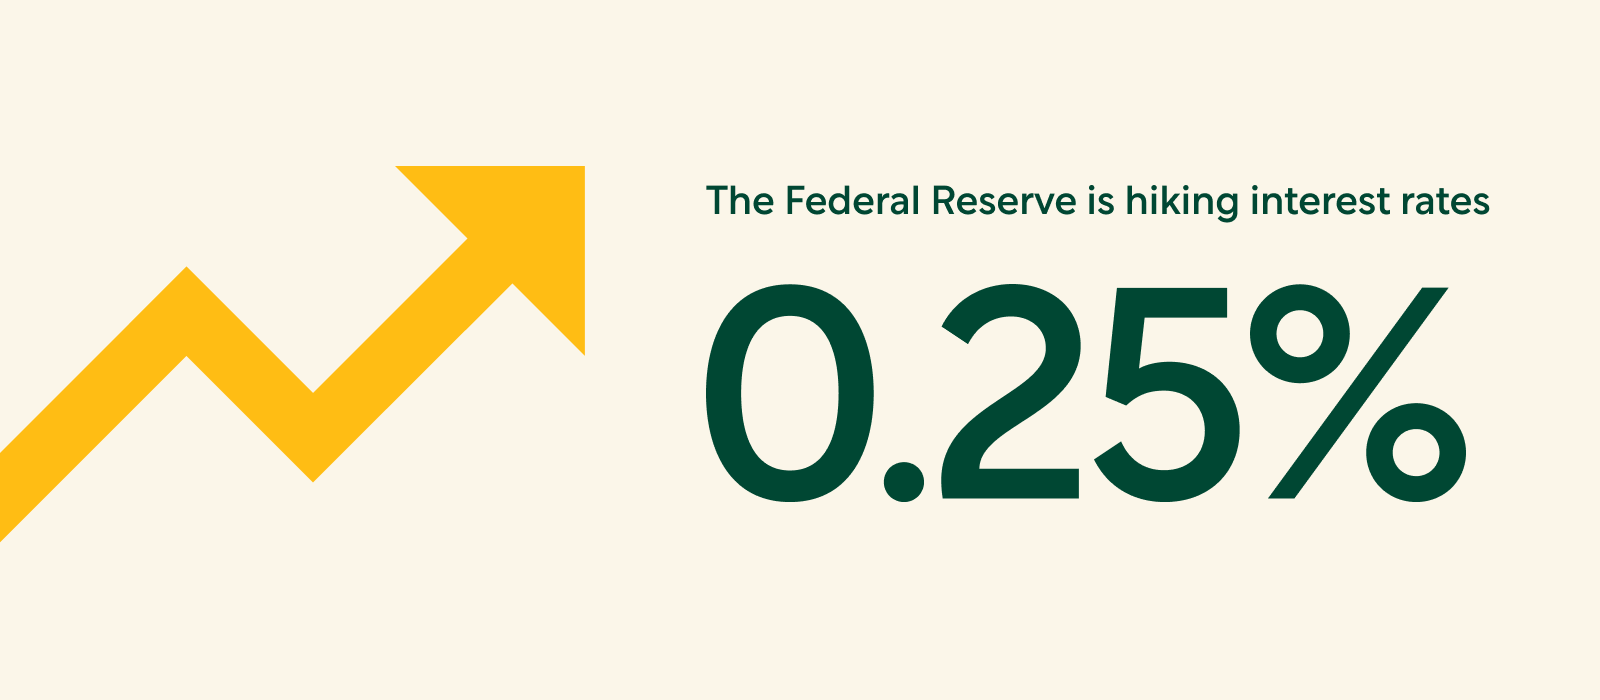 Stylized Image: The Federal Reserve us Hiking Interest Rates 0.25%